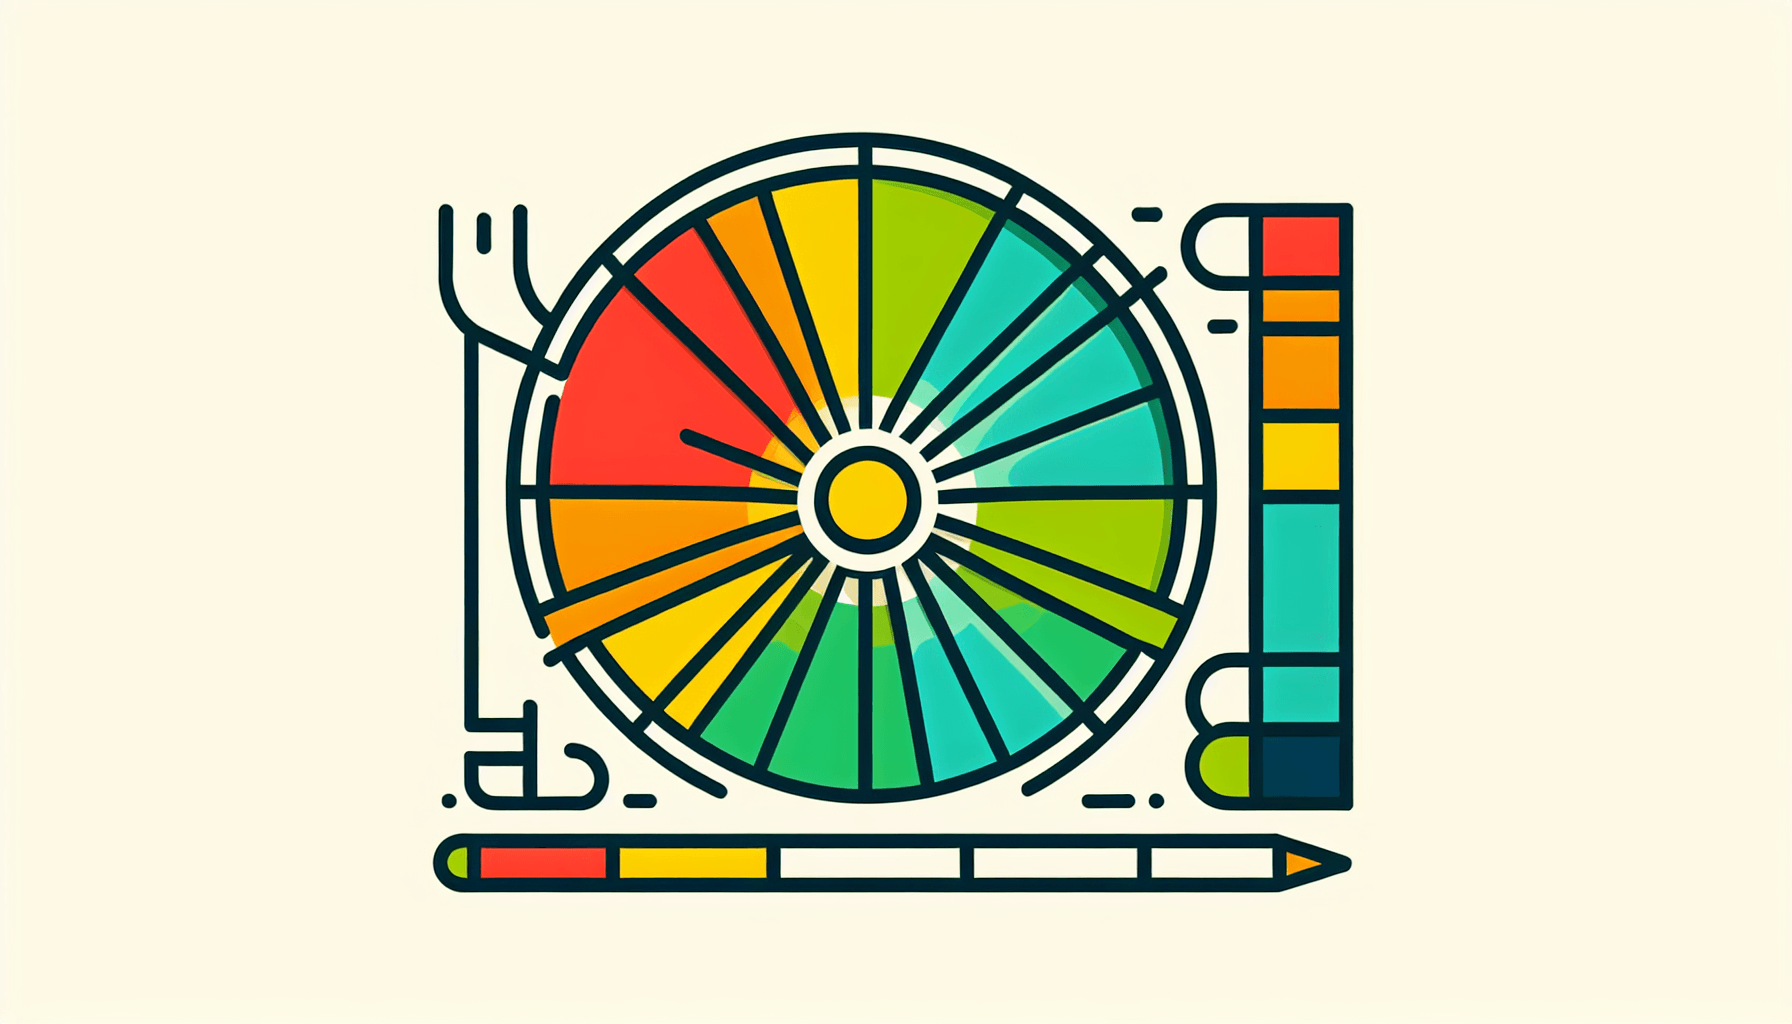 Wheel in flat illustration style and white background, red #f47574, green #88c7a8, yellow #fcc44b, and blue #645bc8 colors.